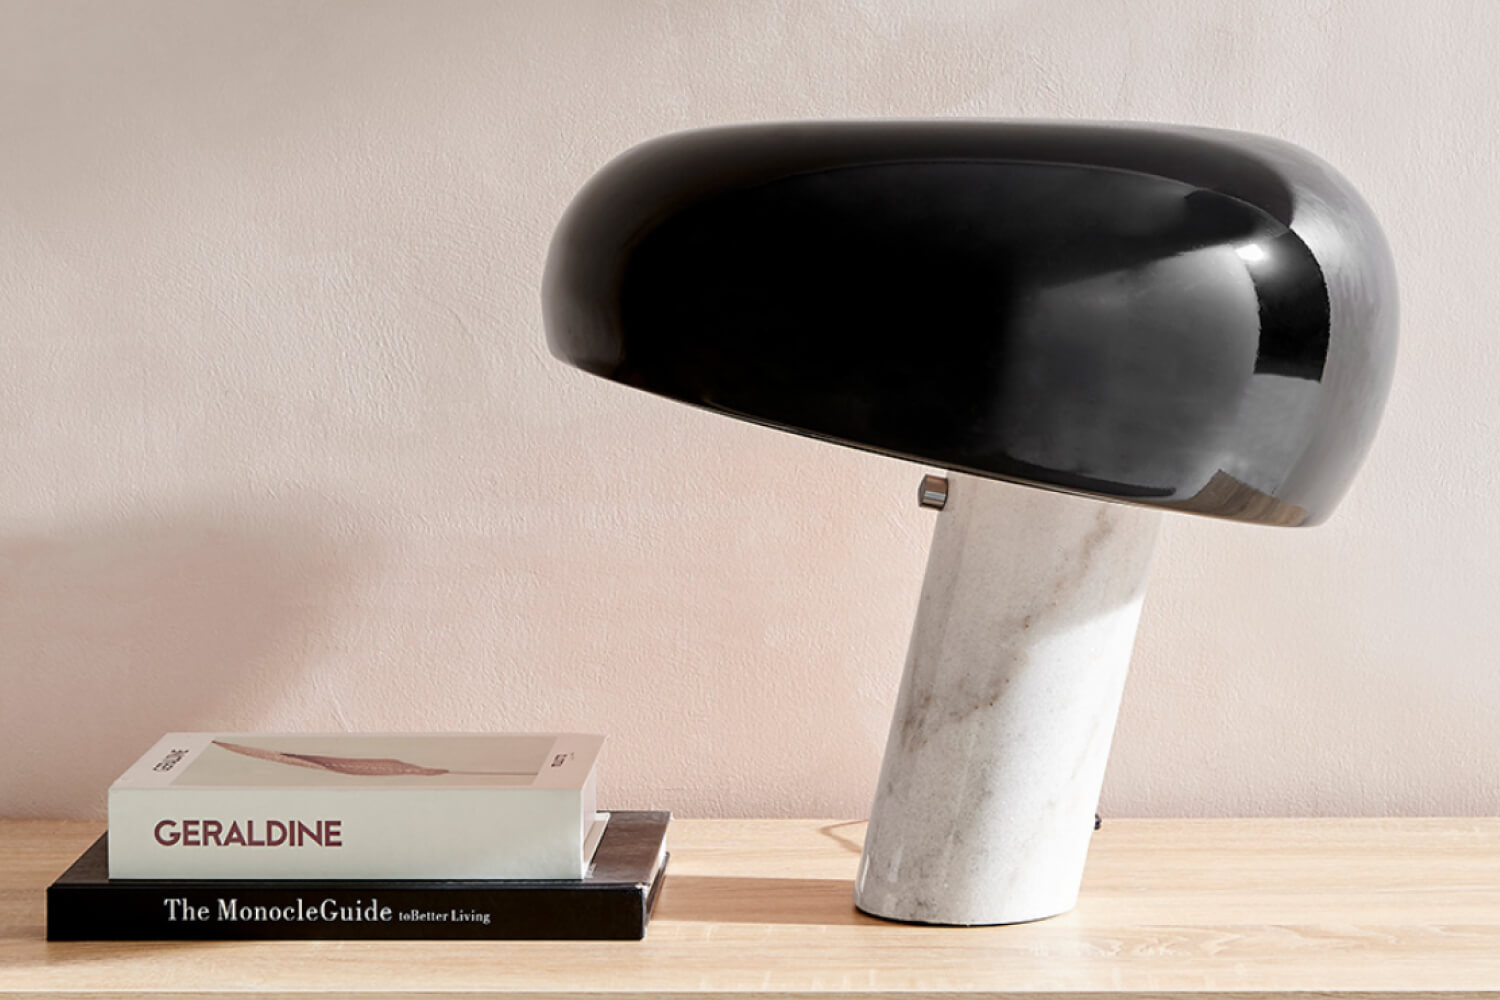 A Snoopy Table Lamp with a distinctive black hood-like shade and white marble base, styled next to a book on a wooden surface against a soft peach-colored wall.